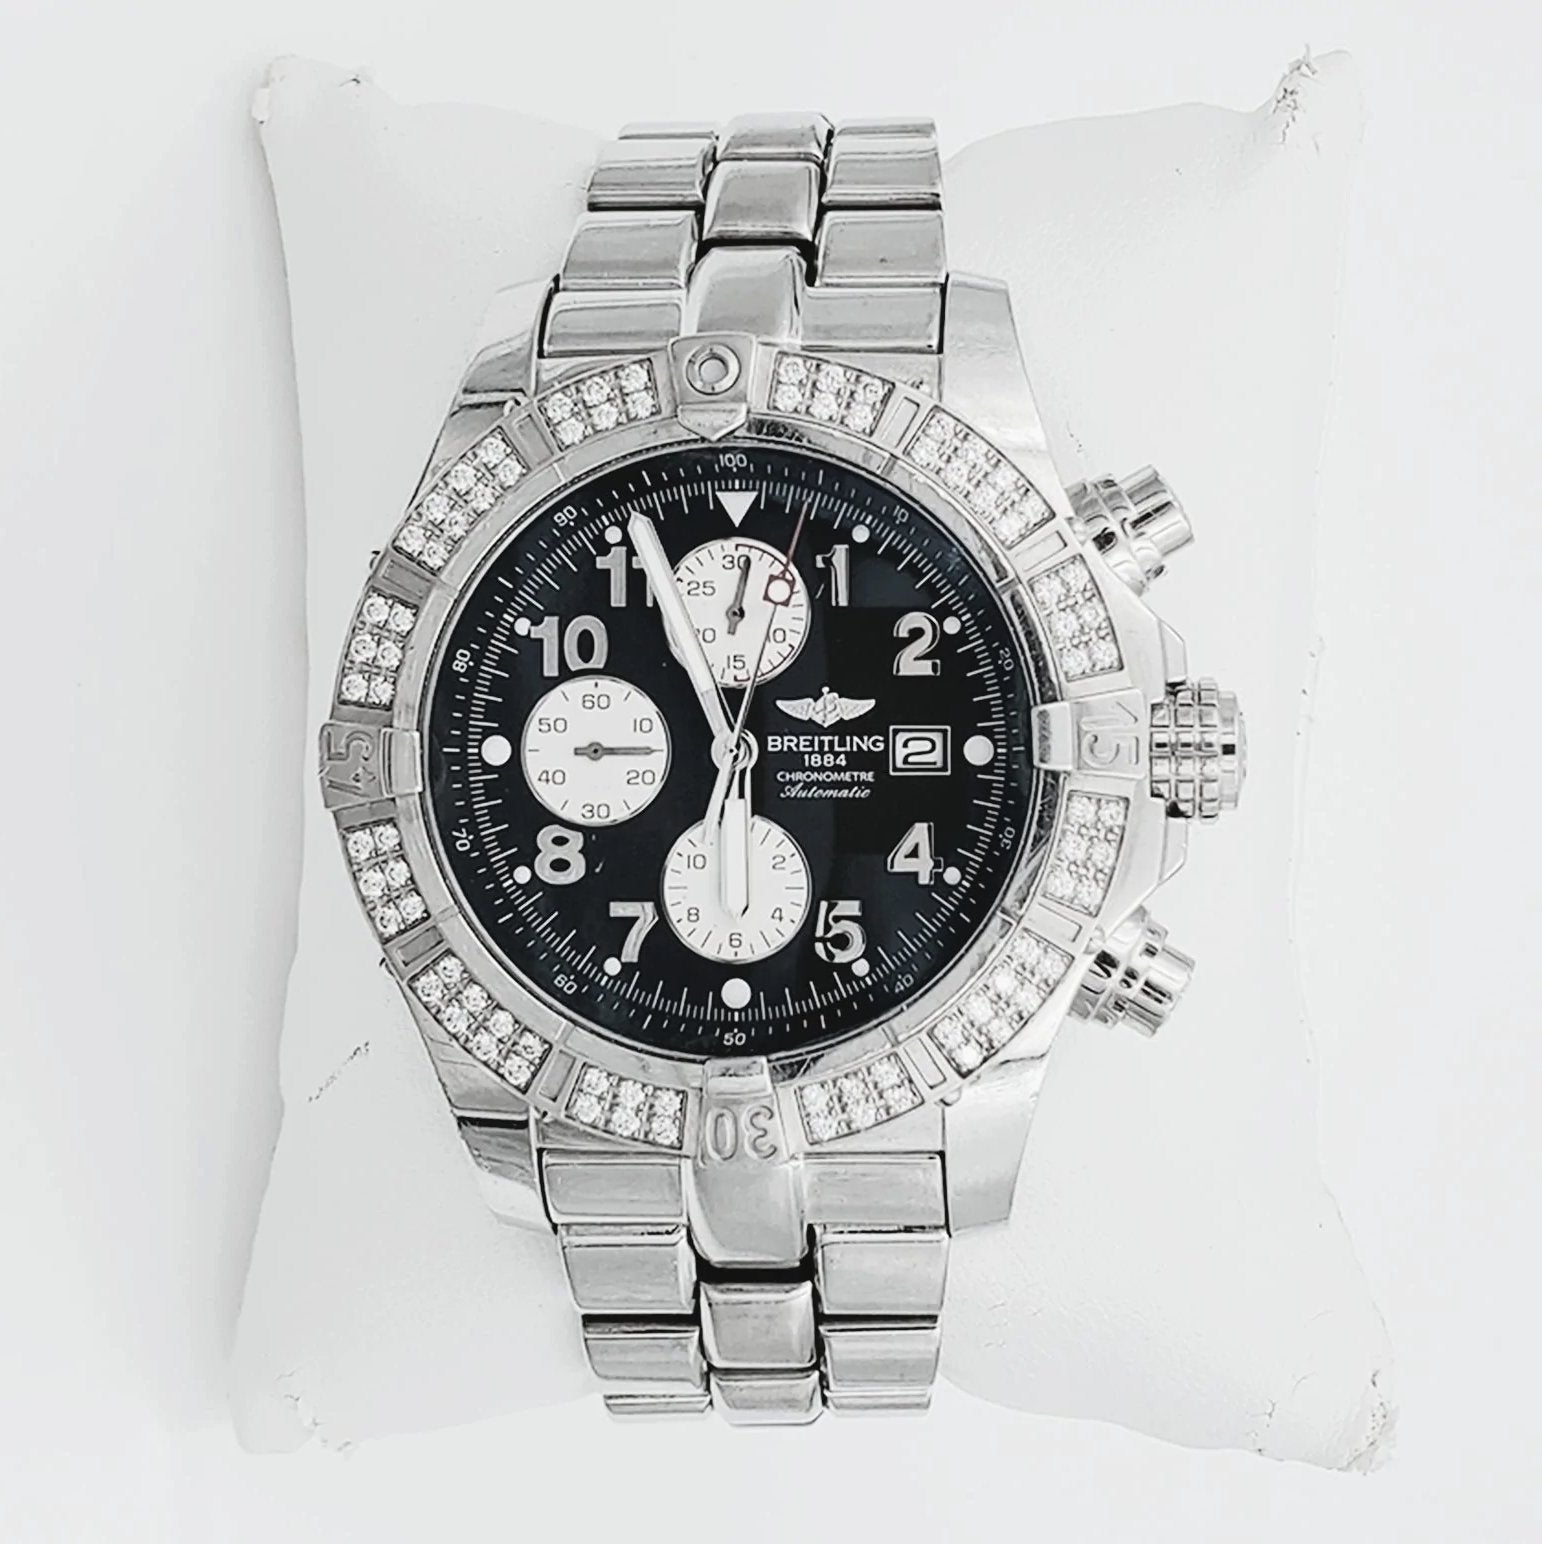 Men's Breitling Super Avenger Chronograph 48mm Stainless Steel Watch with Black Dial and Diamond Bezel. (Pre-Owned A13370)